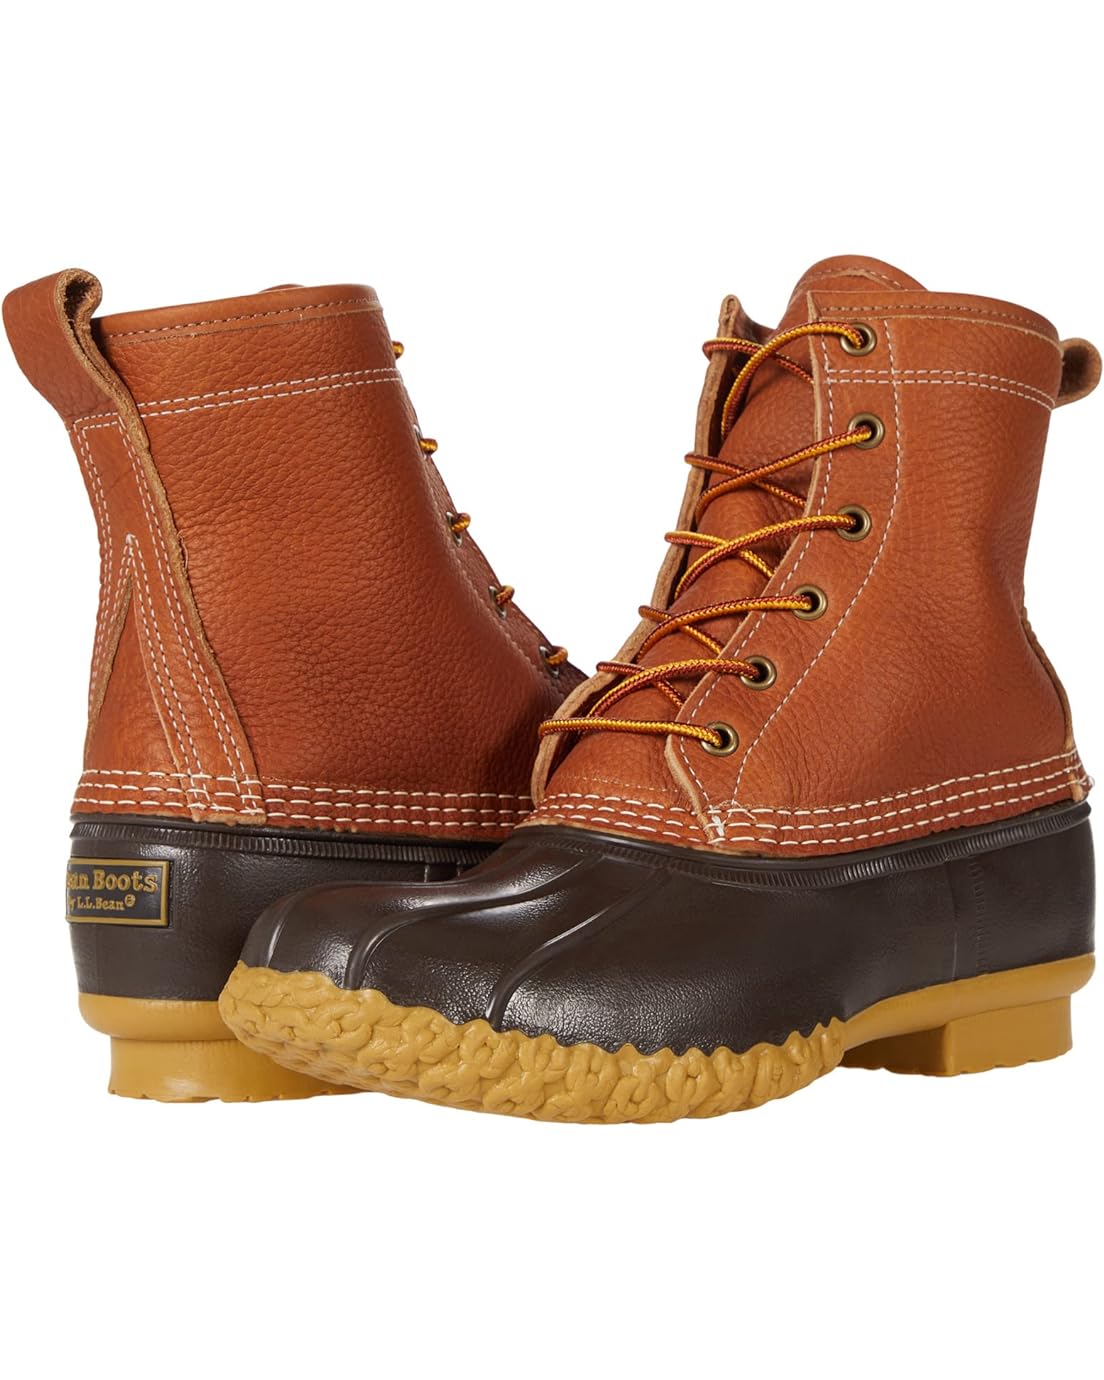 L.L.Bean 8 Tumbled Leather Shearling Lined Bean Boot